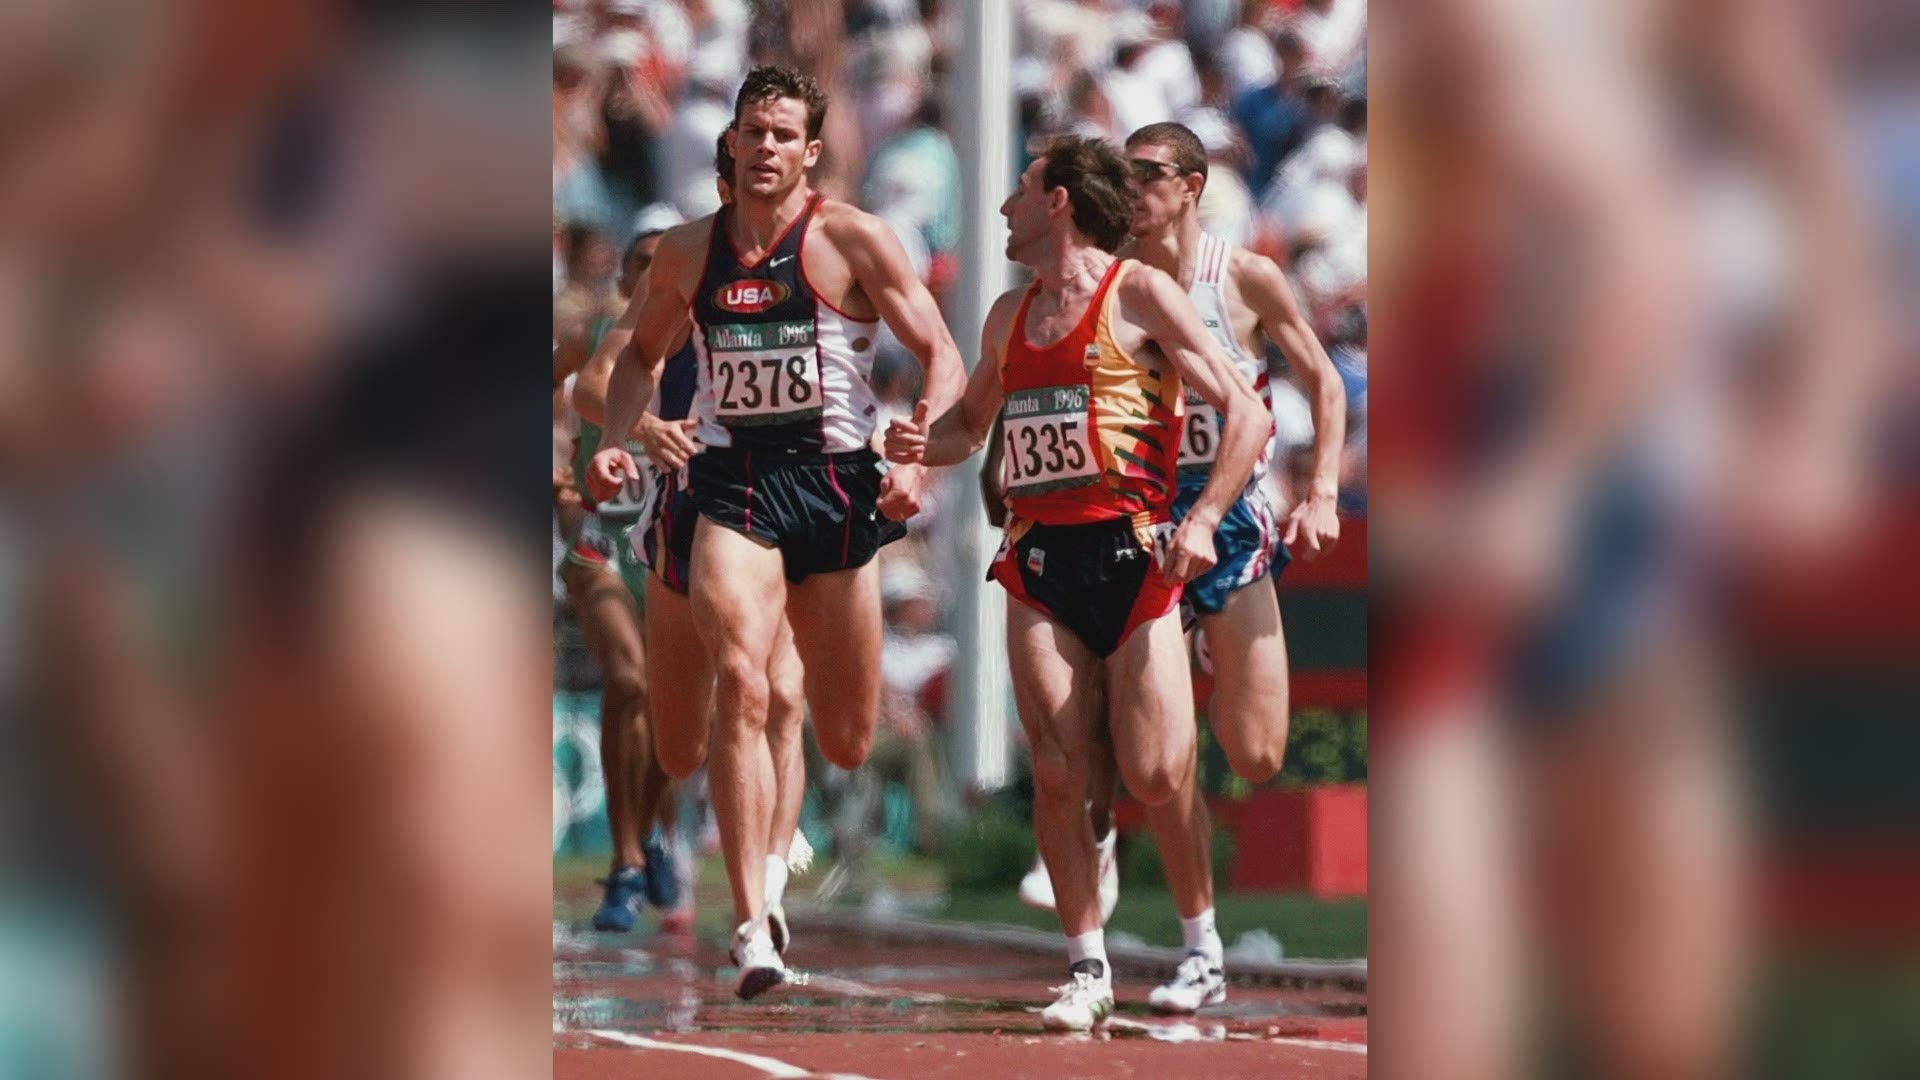 GH's McMullen, a youth track coach and former Olympian, dies 